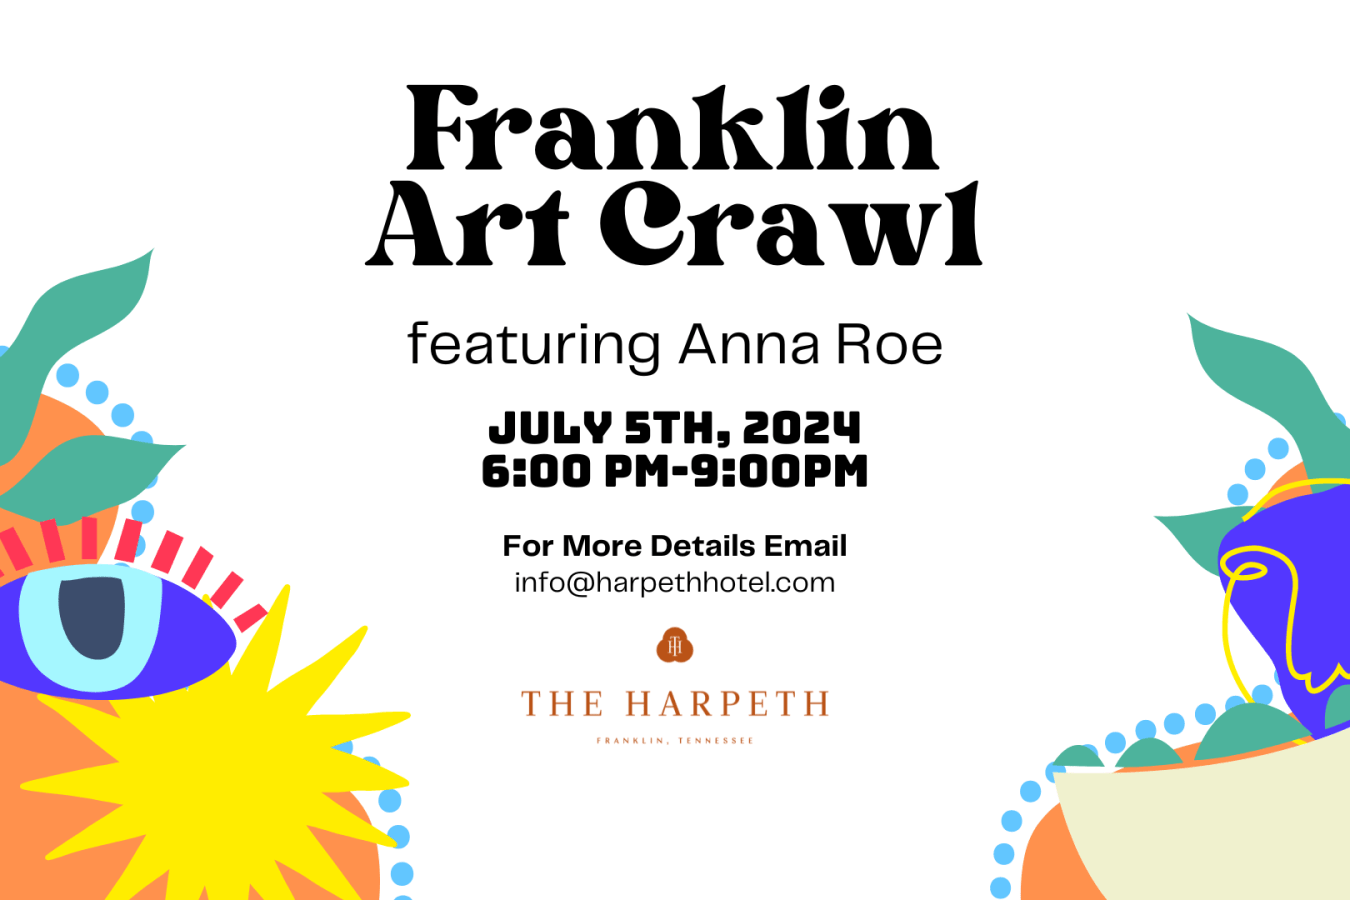 Franklin Art Crawl Featuring Anna Roe in downtown Franklin at The Harpeth.